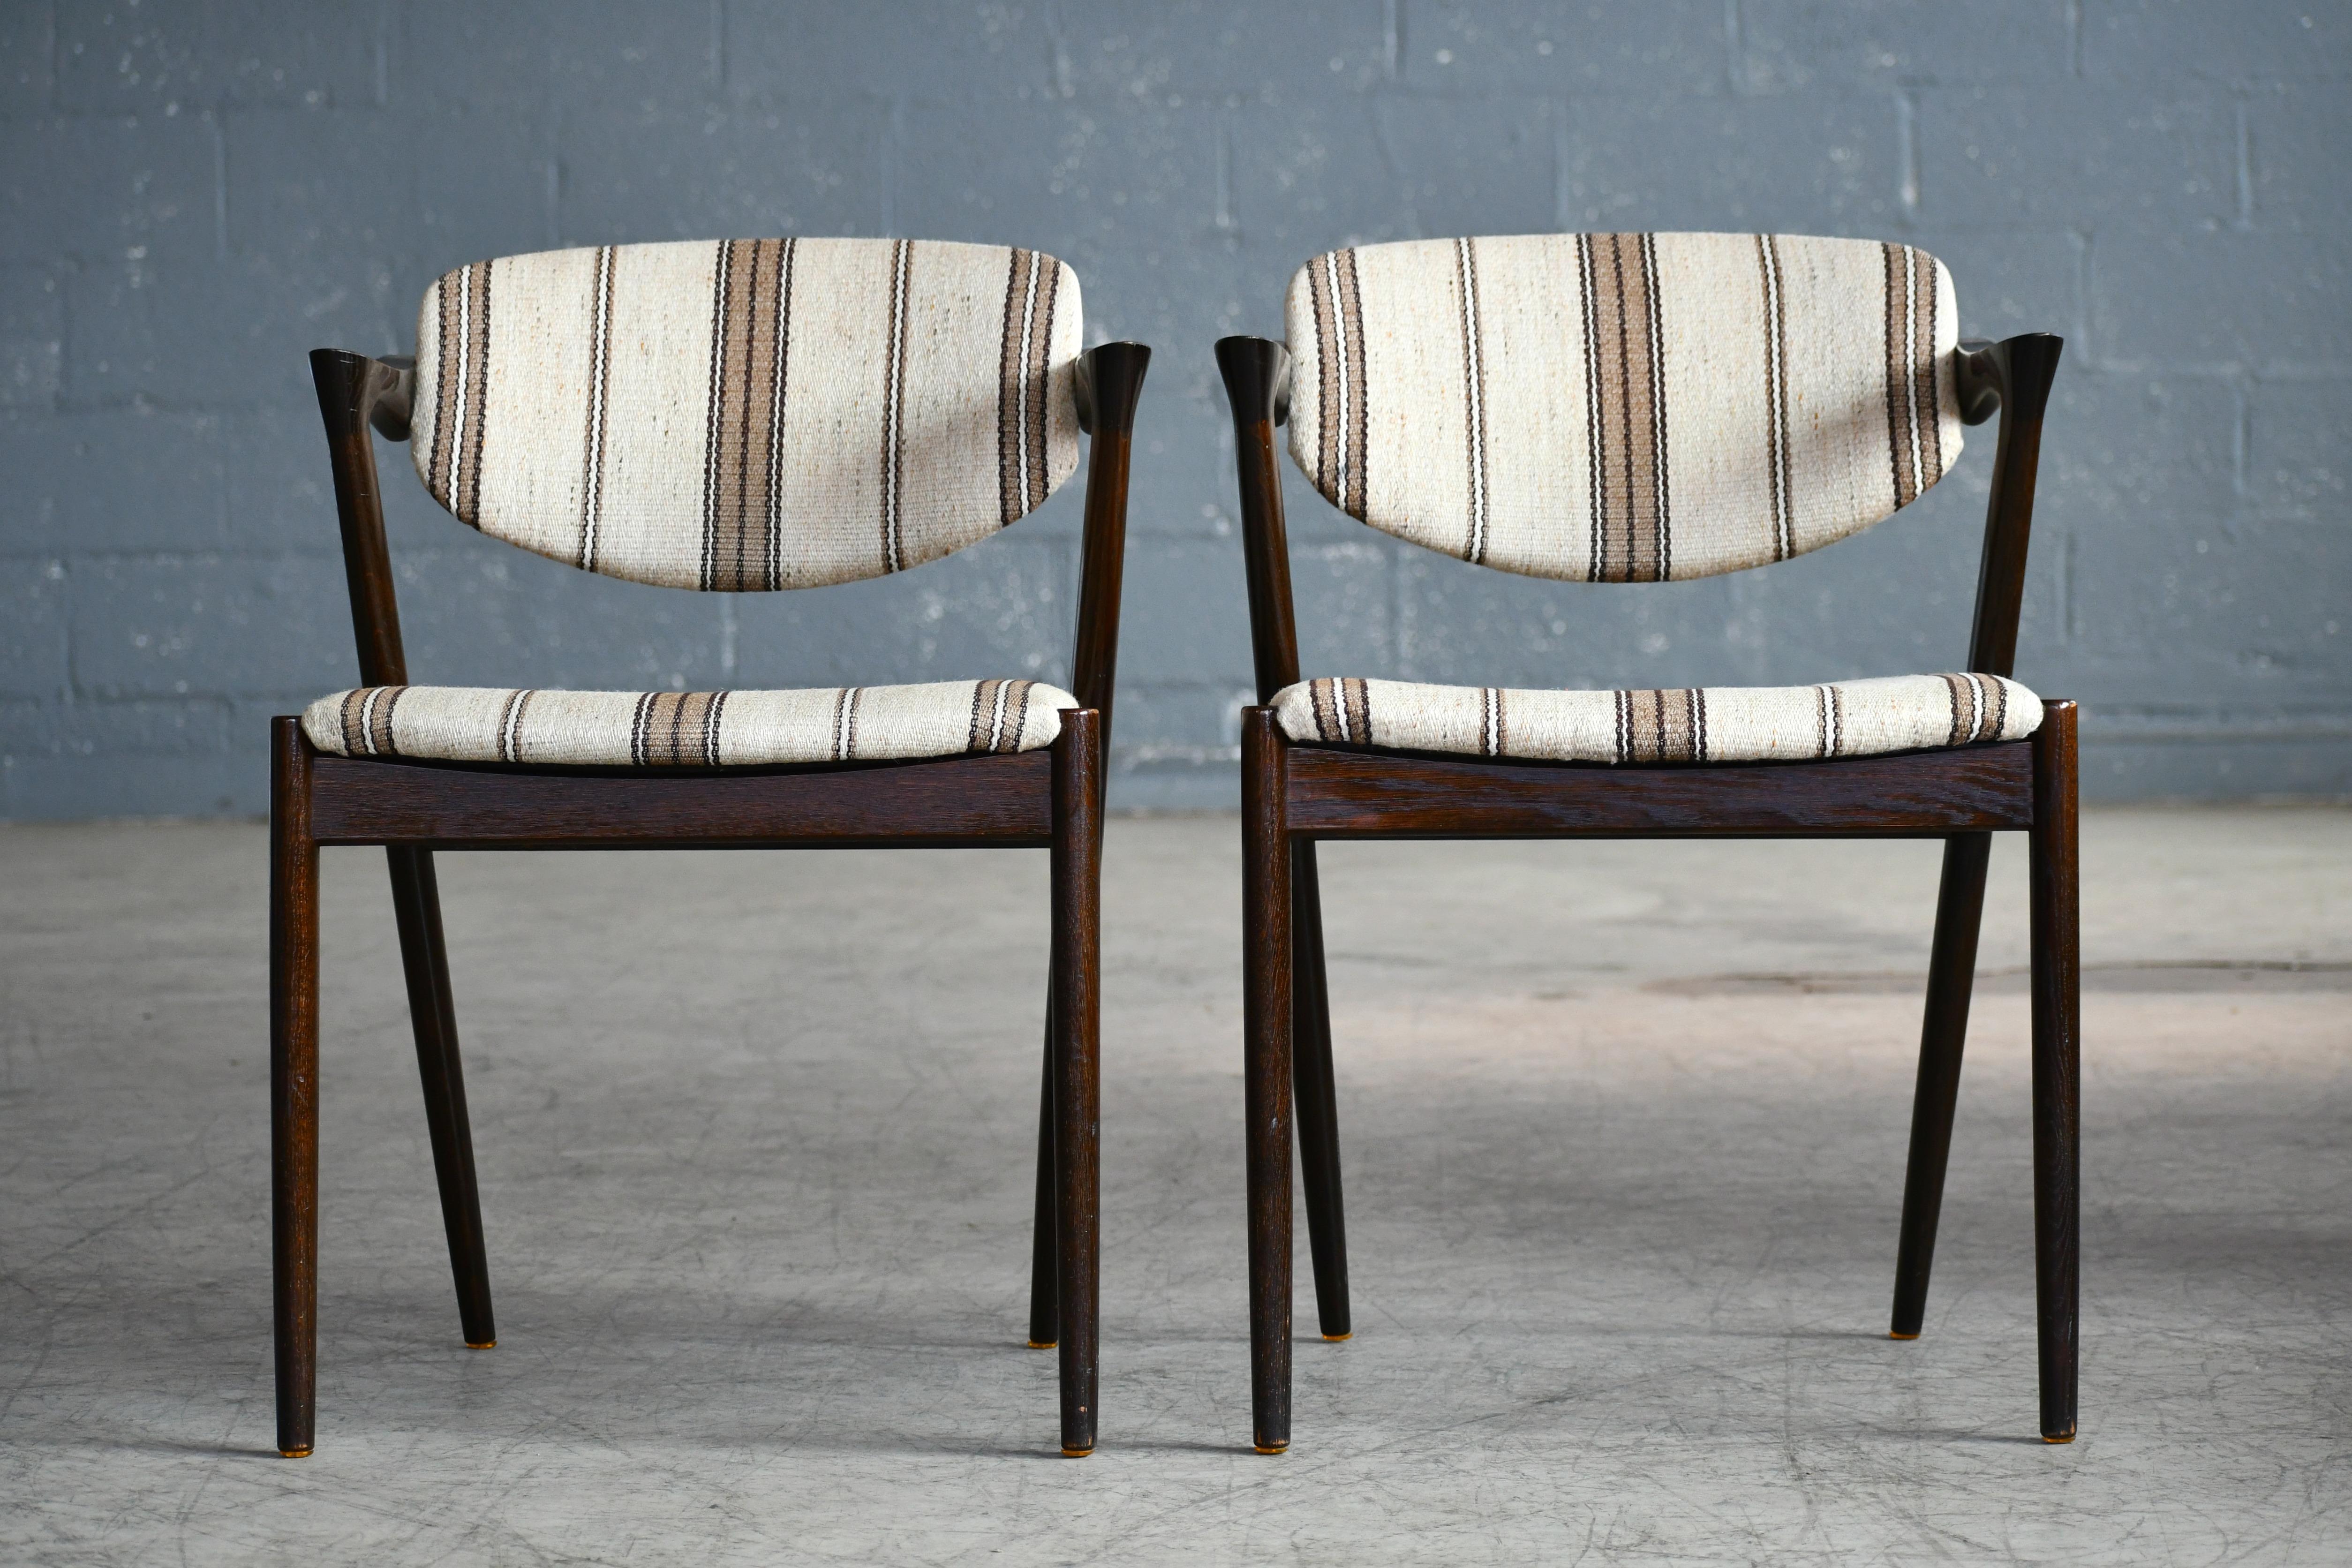 Teak Set of Four Kai Kristiansen Model 42 Dining Chairs in Rosewood Stained Oak